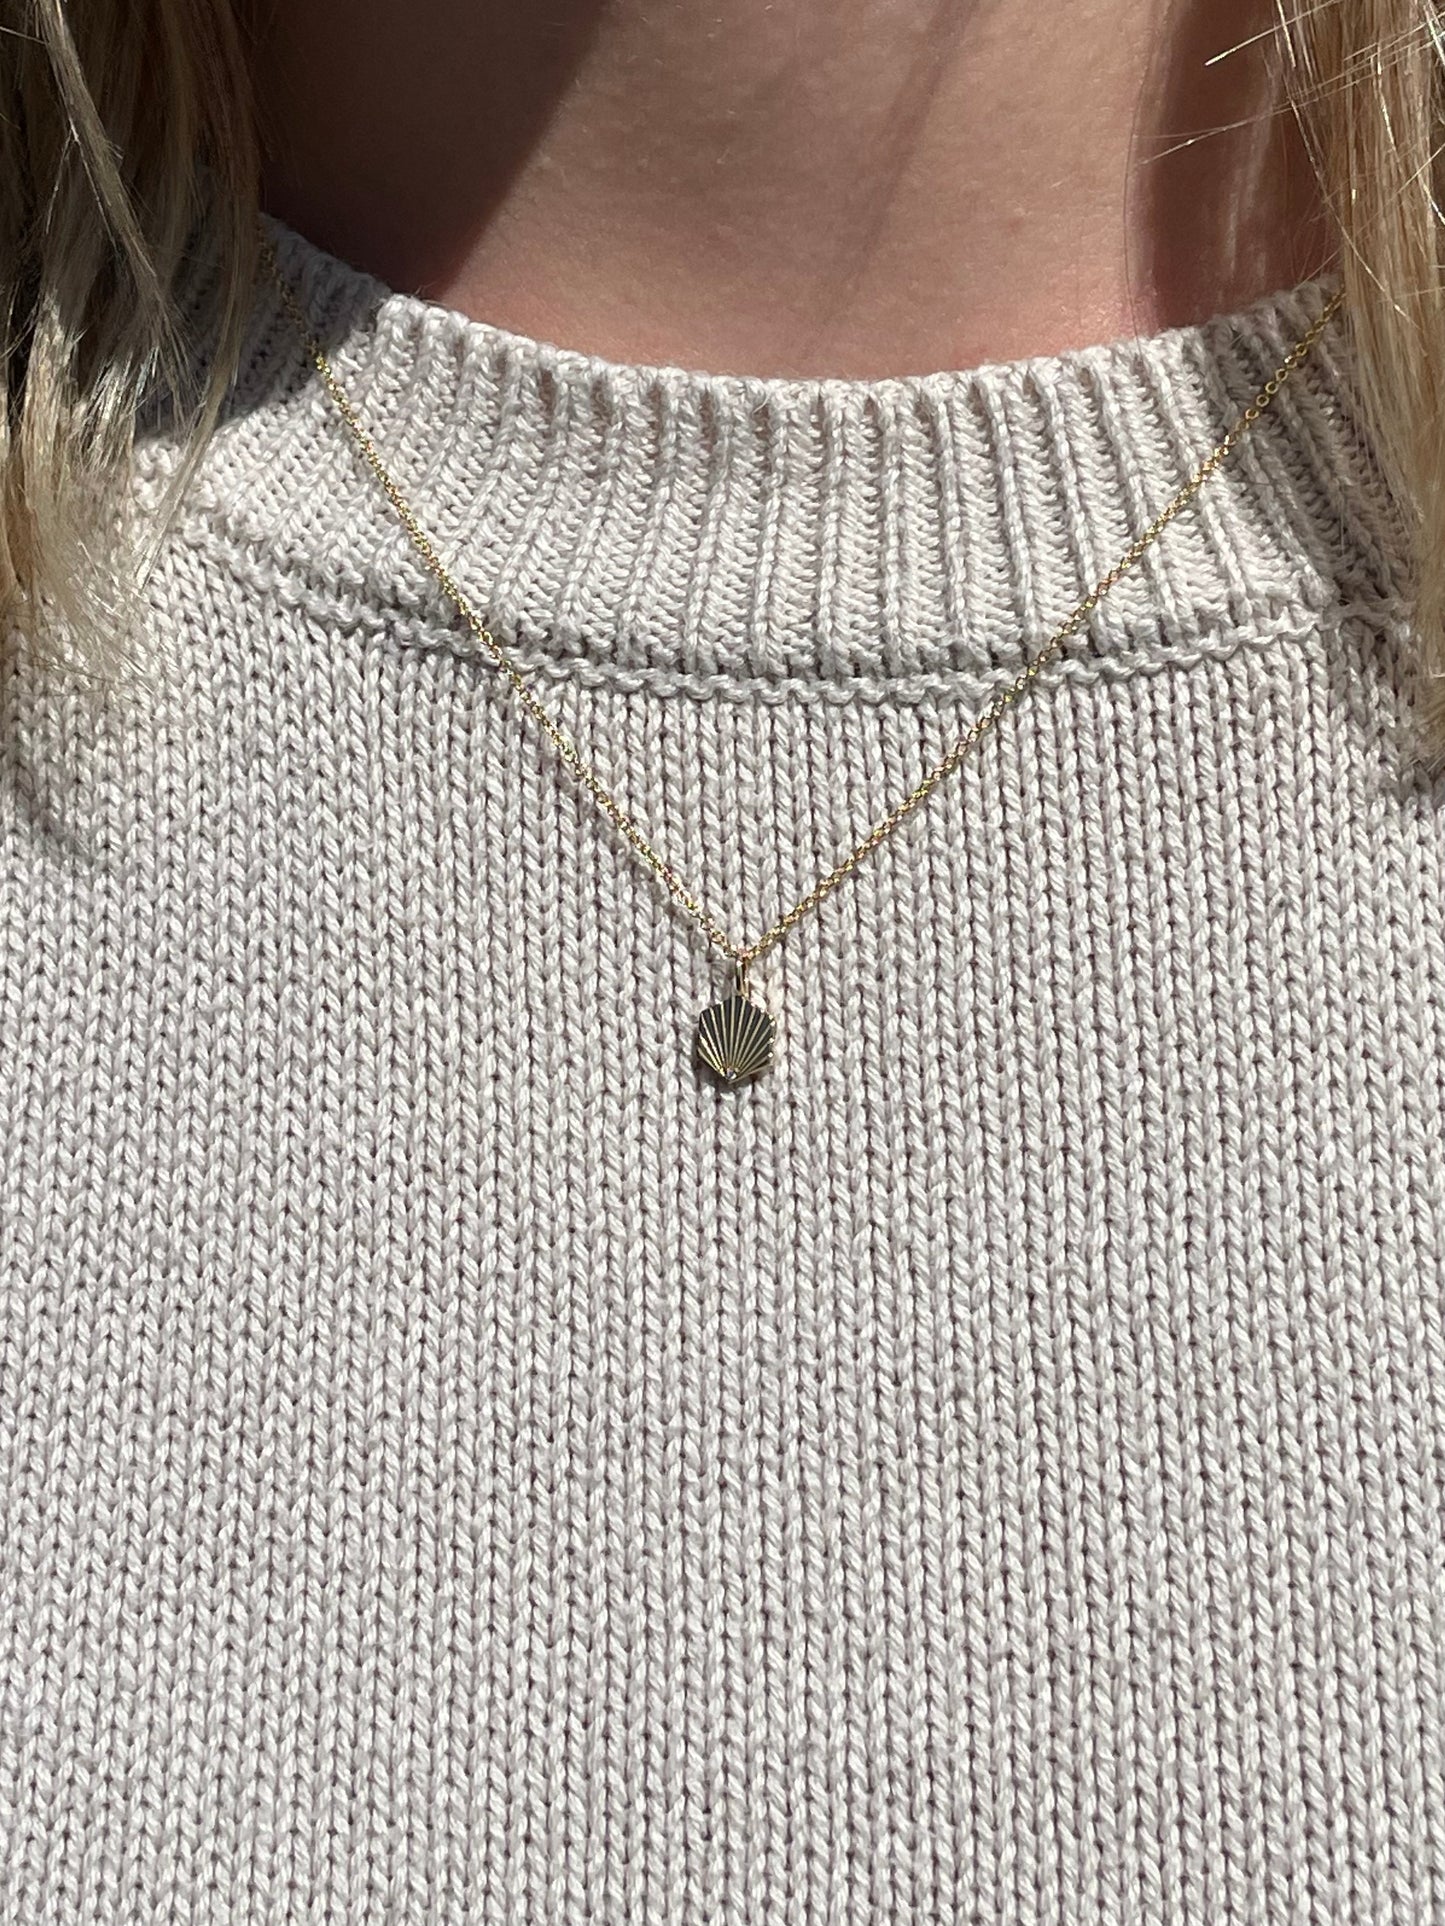 The Mini Shell Pendant Necklace by Sarah O